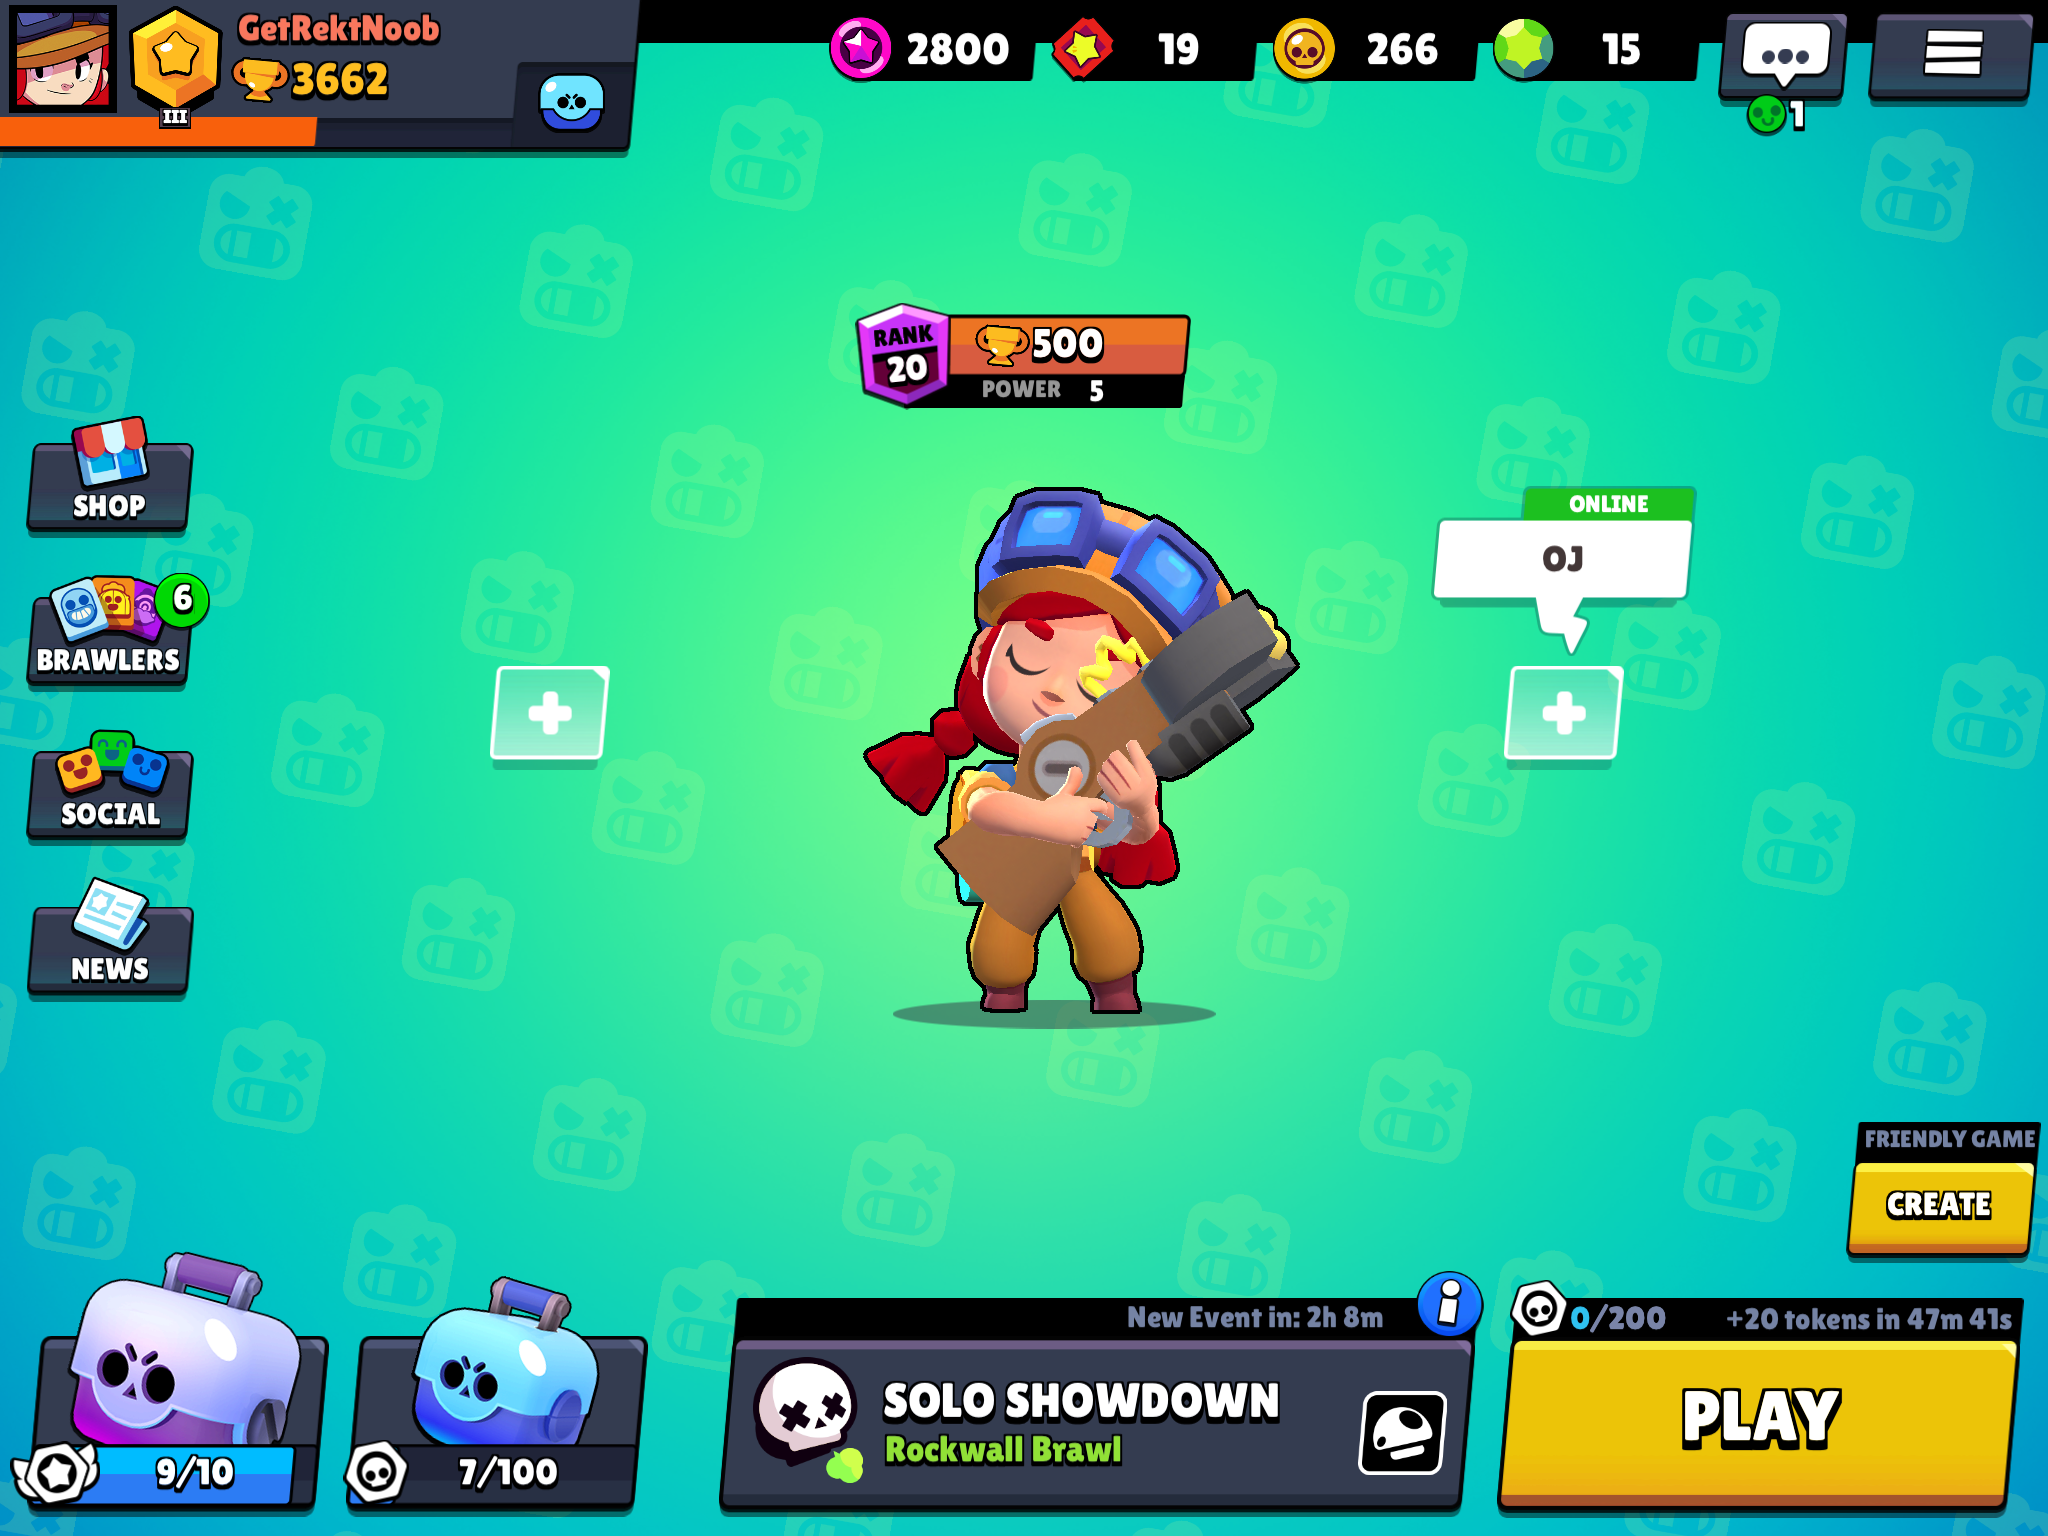 Was Scrolling Through Some Old Brawl Stars Stuff Fandom - how is old pam from brawl stars